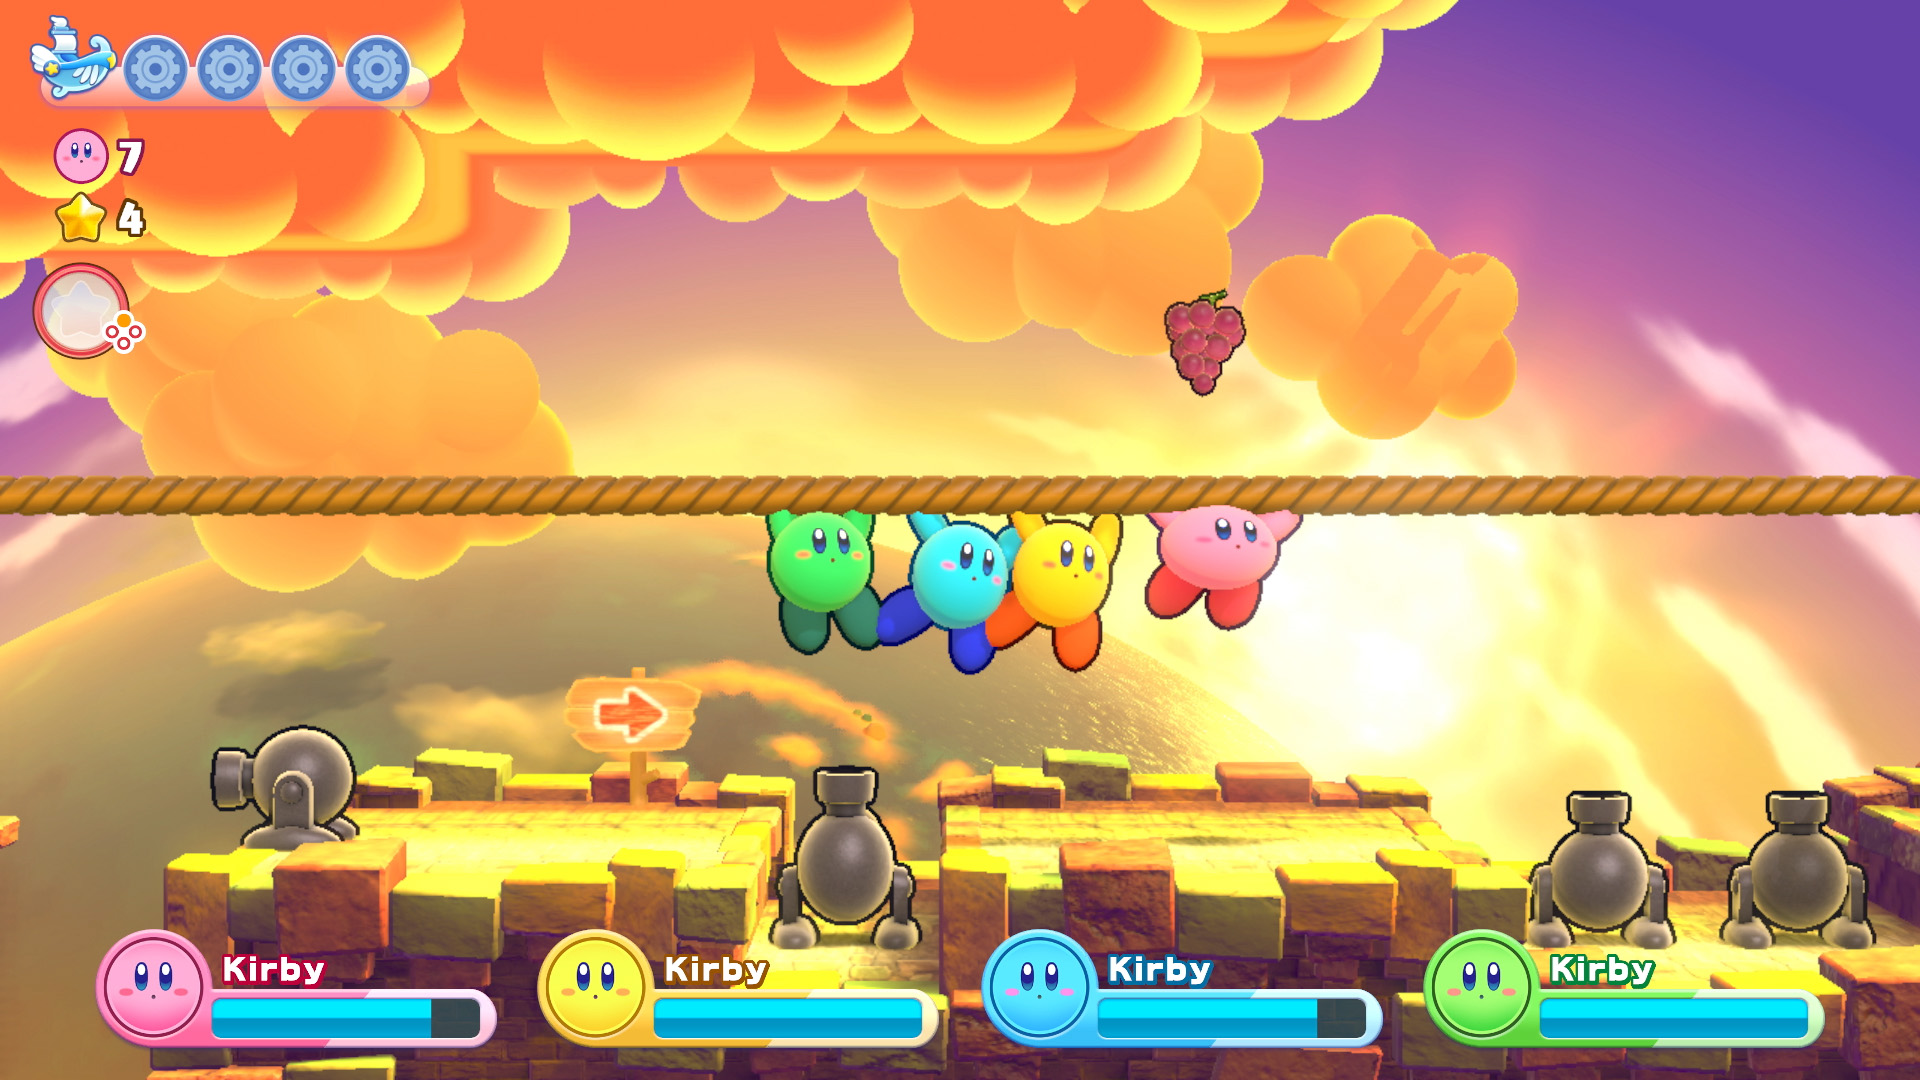 Kirby's Return to Dream Land Deluxe Nintendo Switch Account pixelpuffin.net Activation Link 37.28 USD